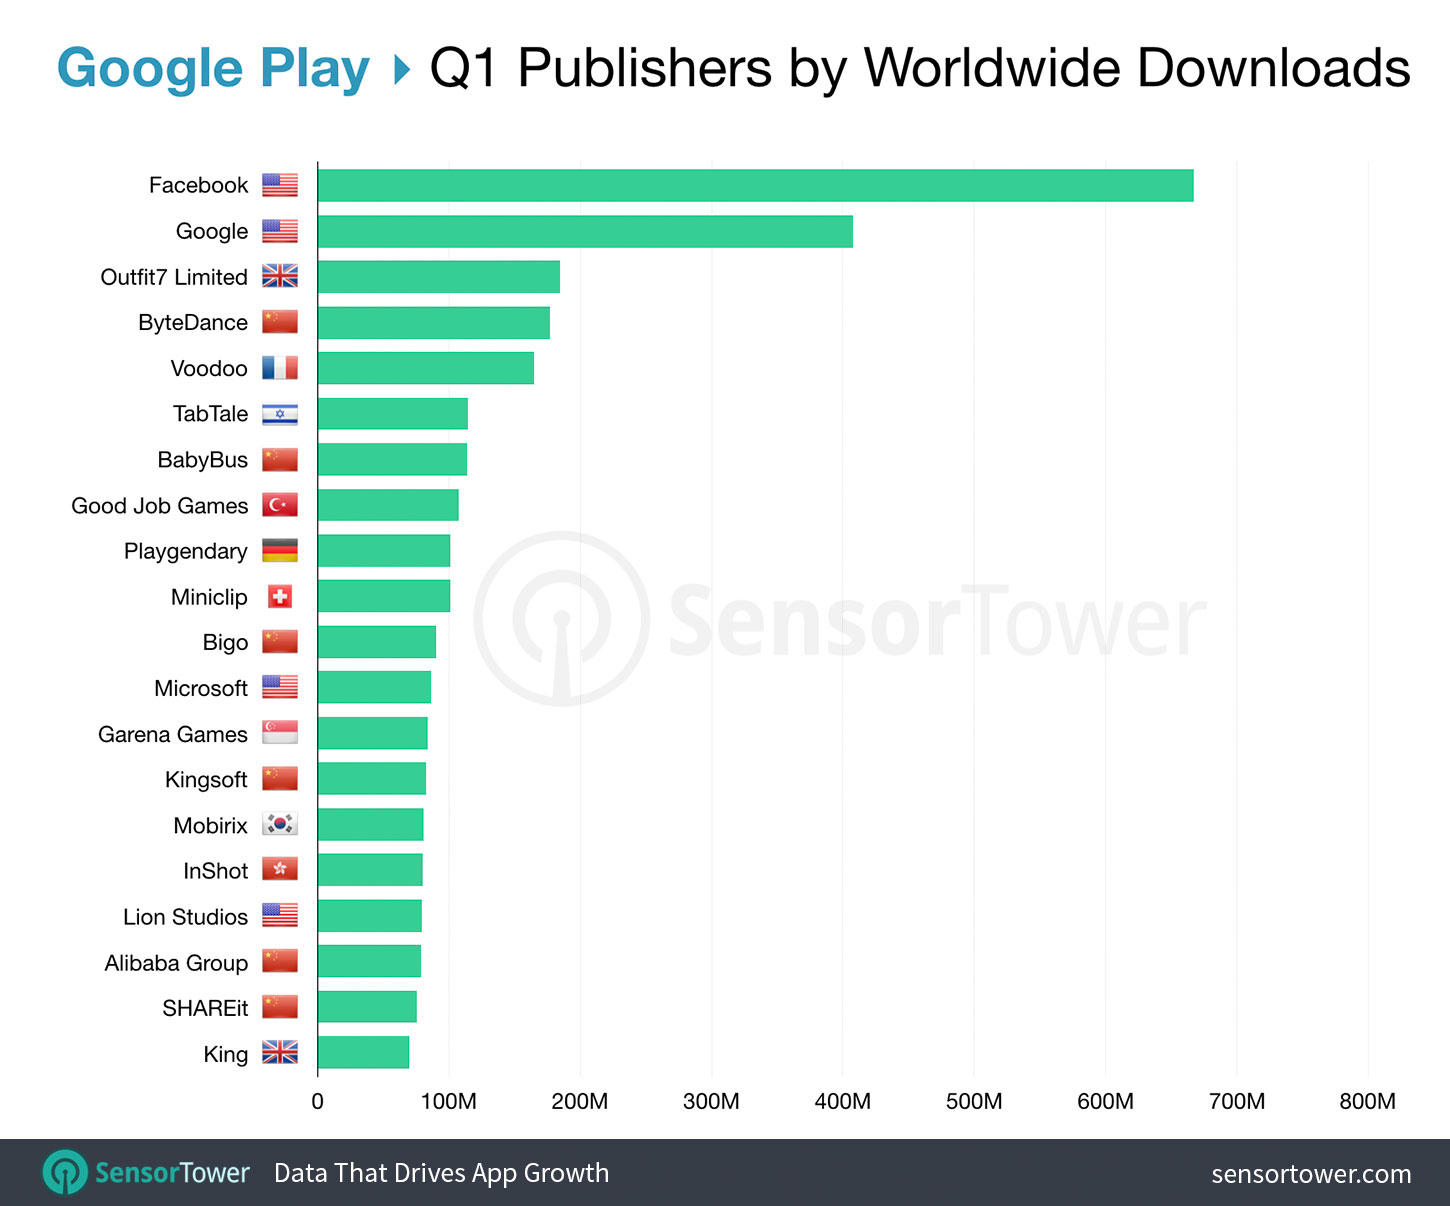 Top Google Play Publishers Worldwide for Q1 2019